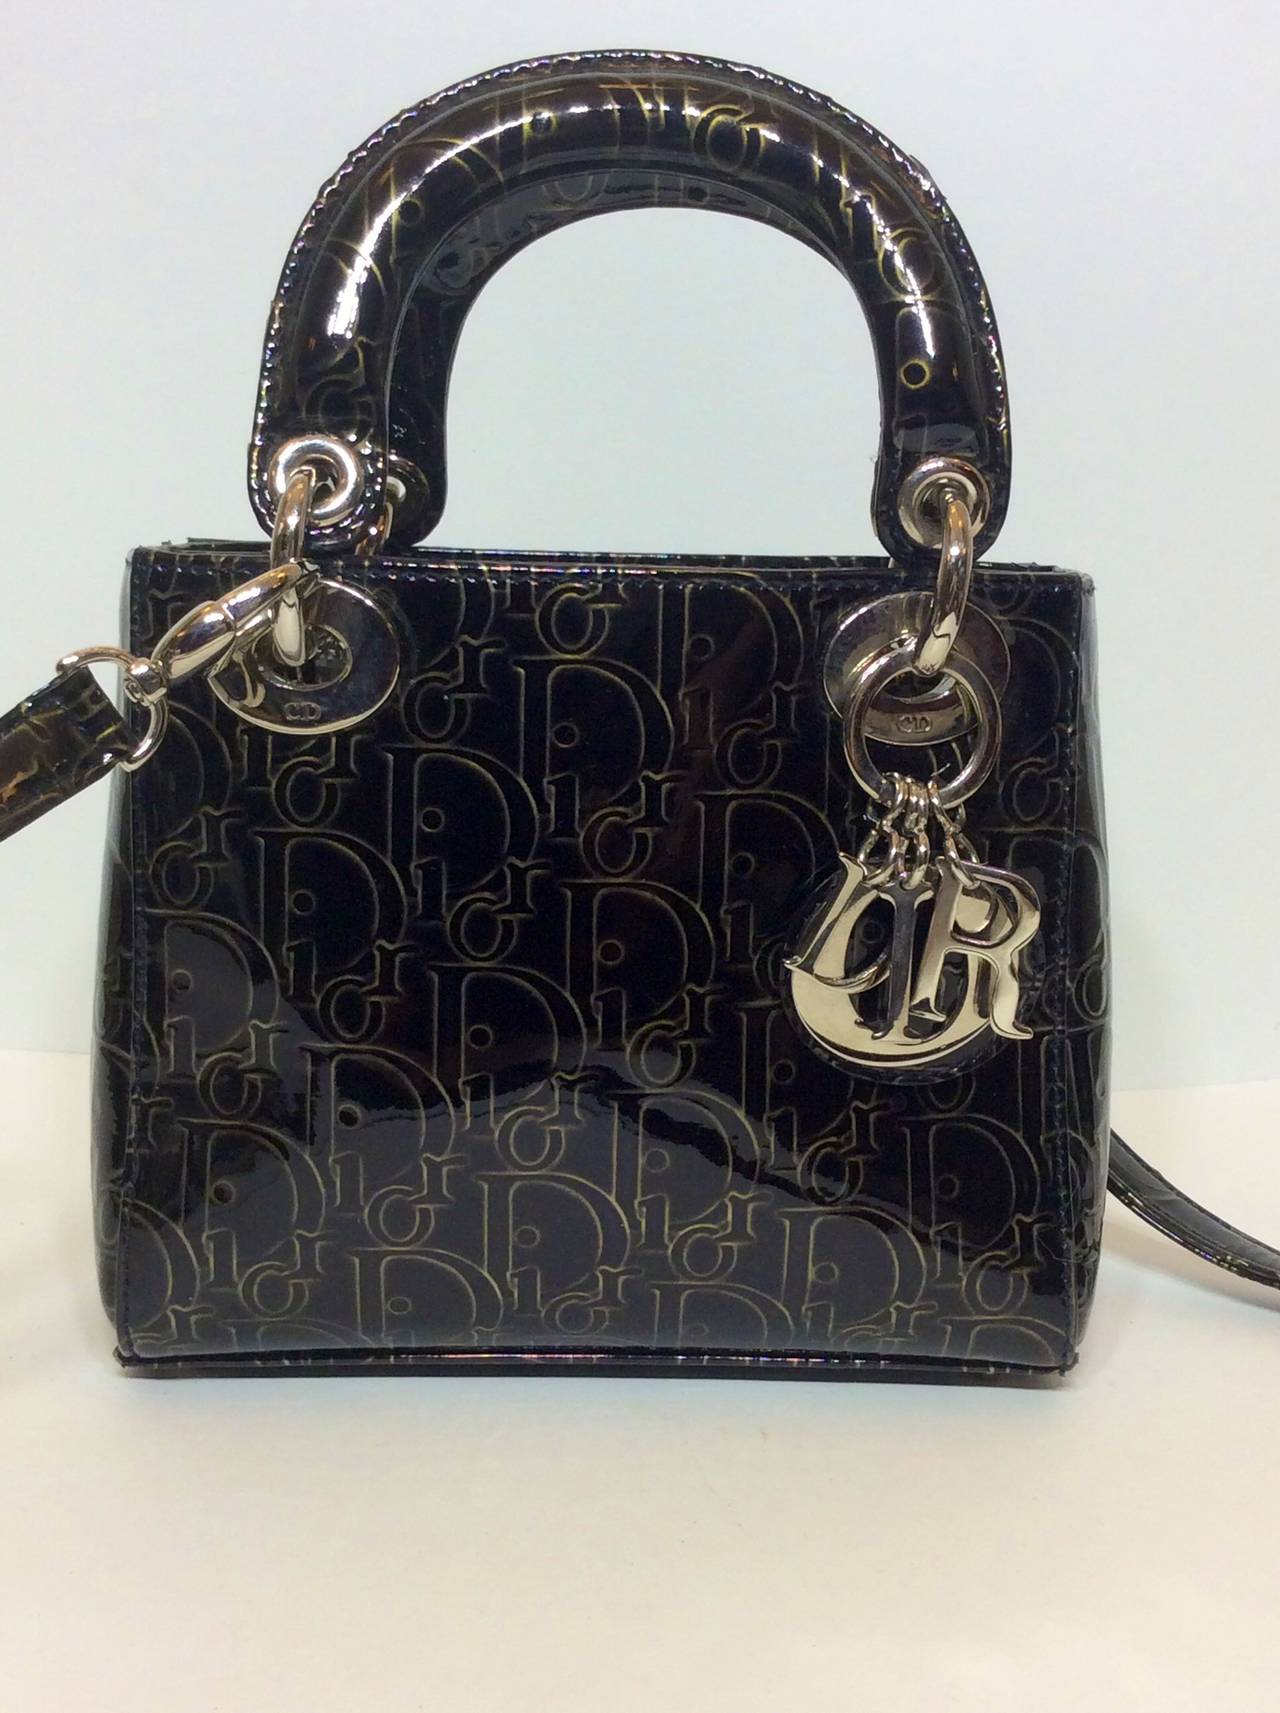 This is a gorgeous Christian Dior Rare Mini Lady Dior Gold Monogram Black Patent Leather Top Handles Handbag with optional shoulder strap.
Top flap with magnetic snap closure
One zipper slot interior pocket
Measurements: 
6